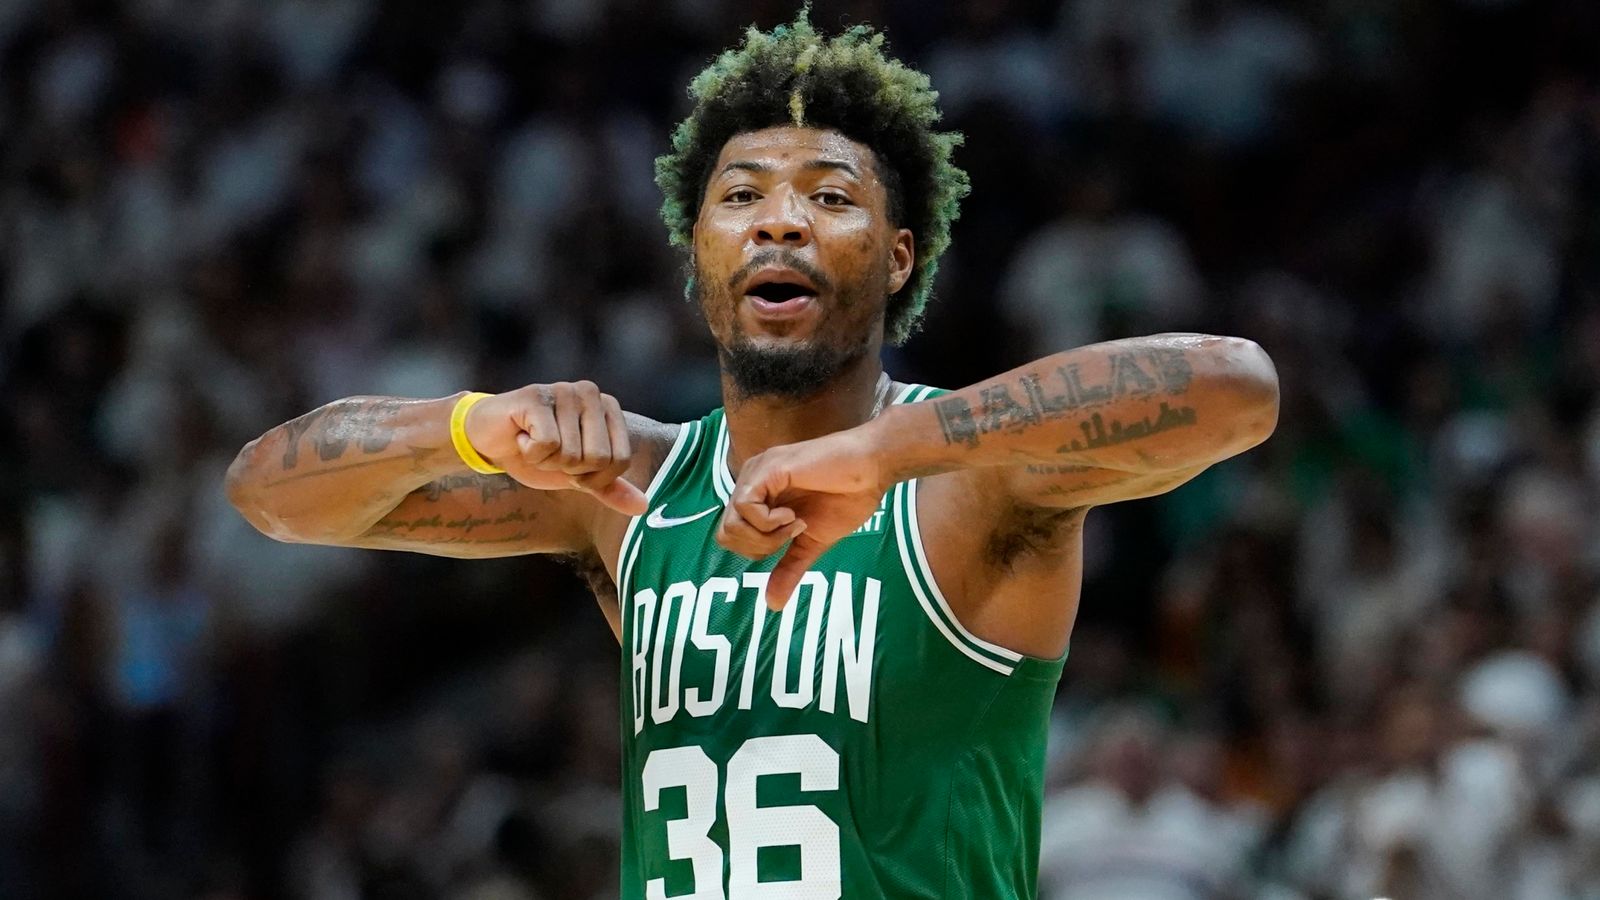 Heat @ Celtics: Marcus Smart and Boston hope to maintain energy from Game 2